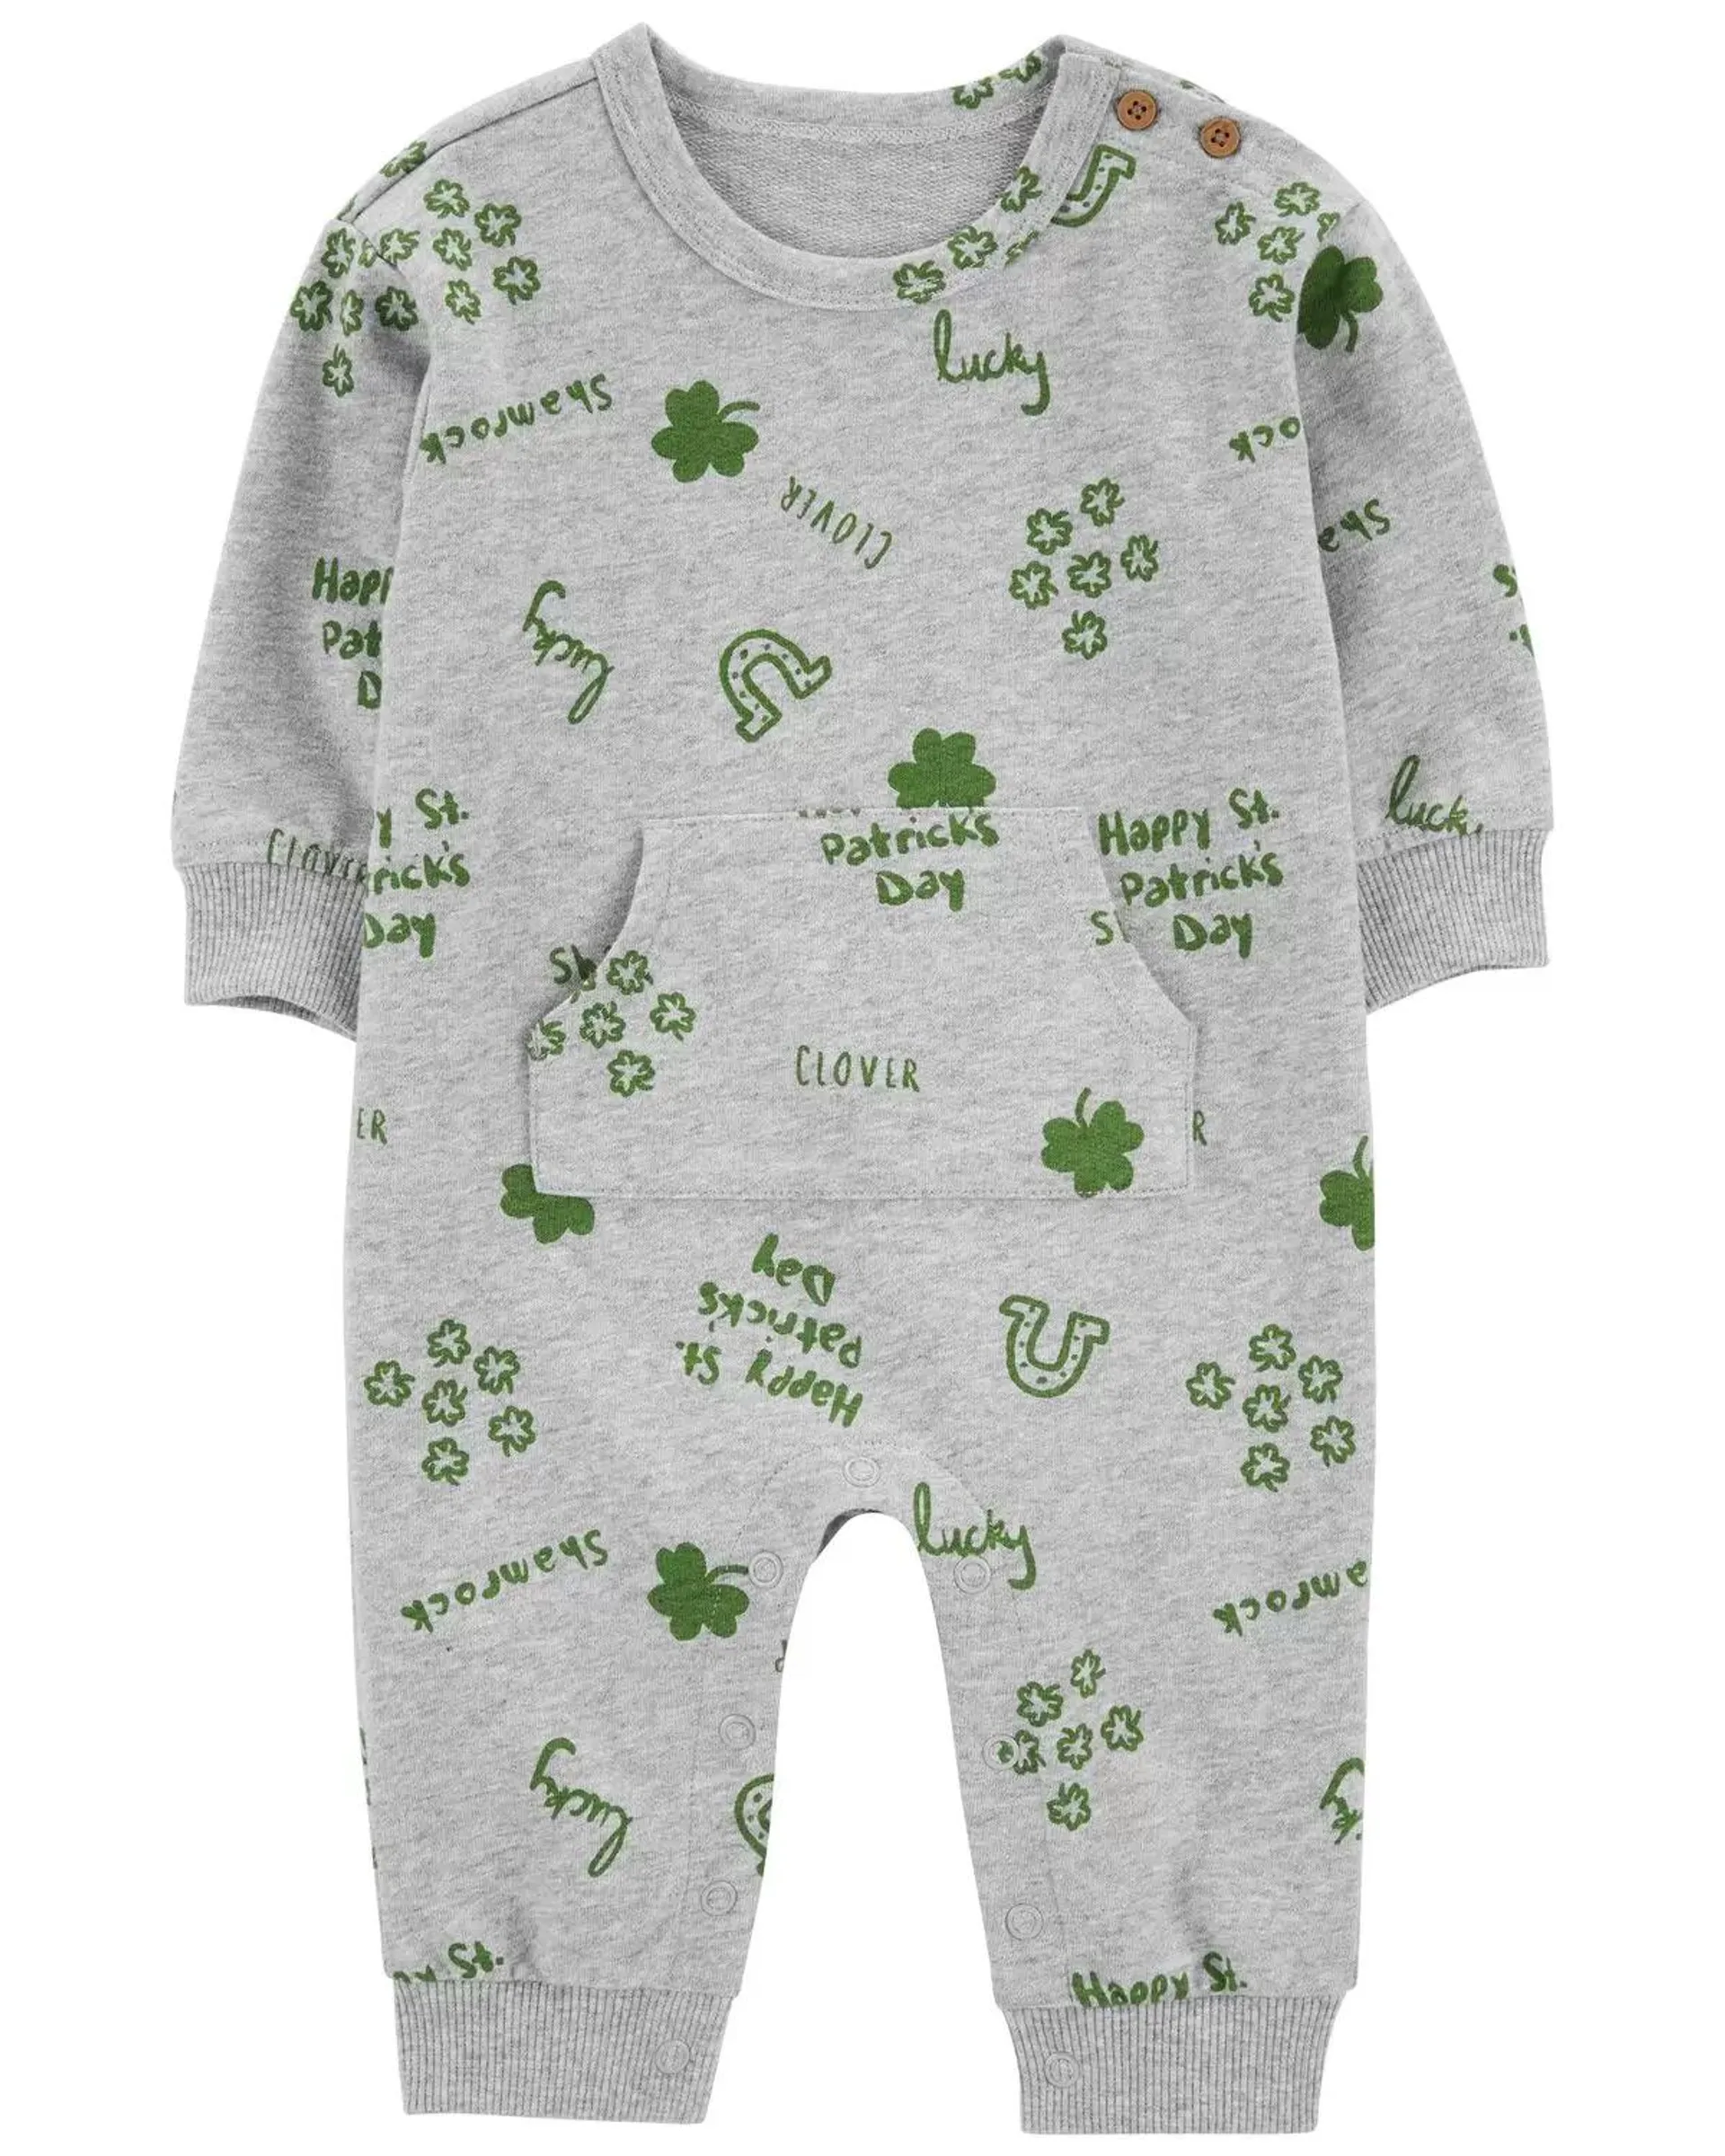 Baby St. Patrick's Day Jumpsuit